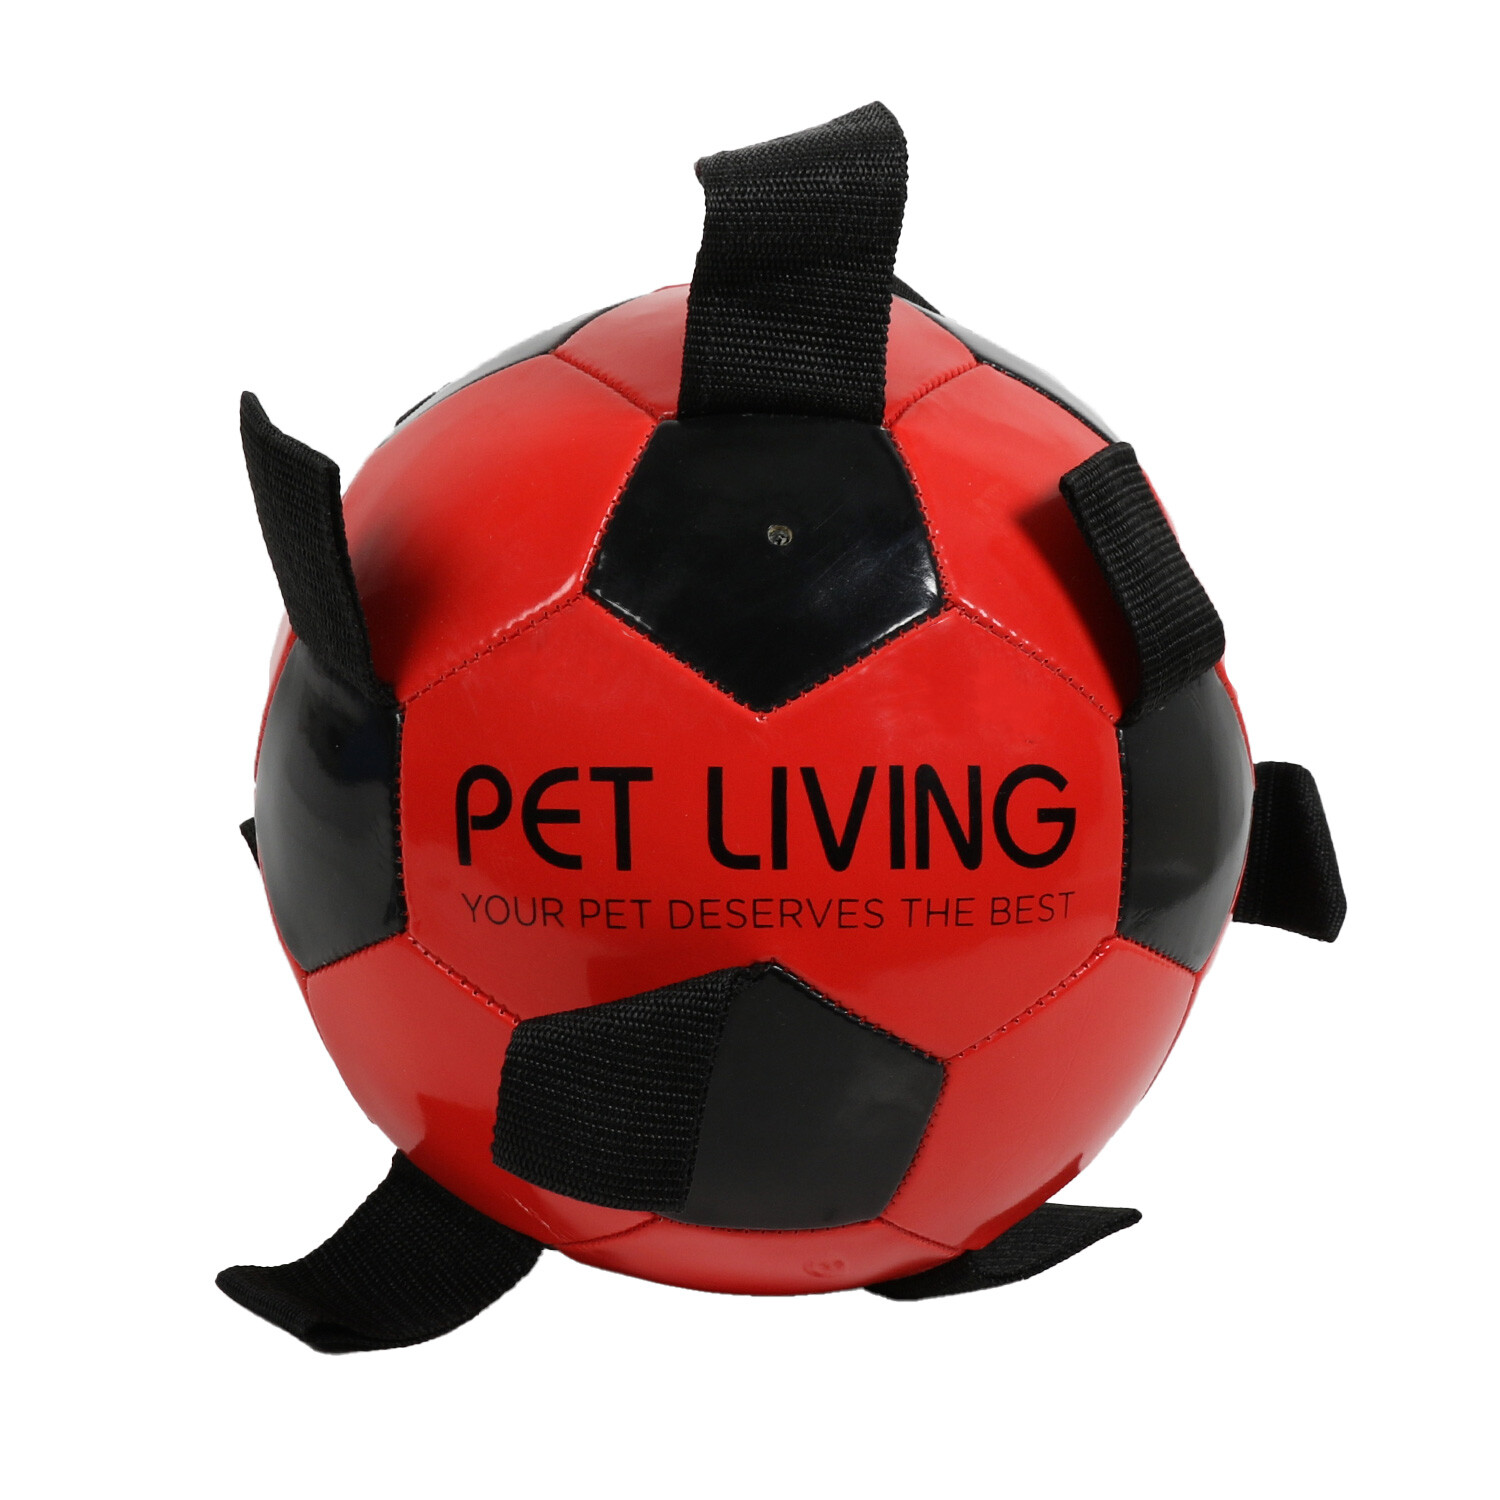 Single Pet Living Pick Me Up Football Dog Toy in Assorted styles Image 2